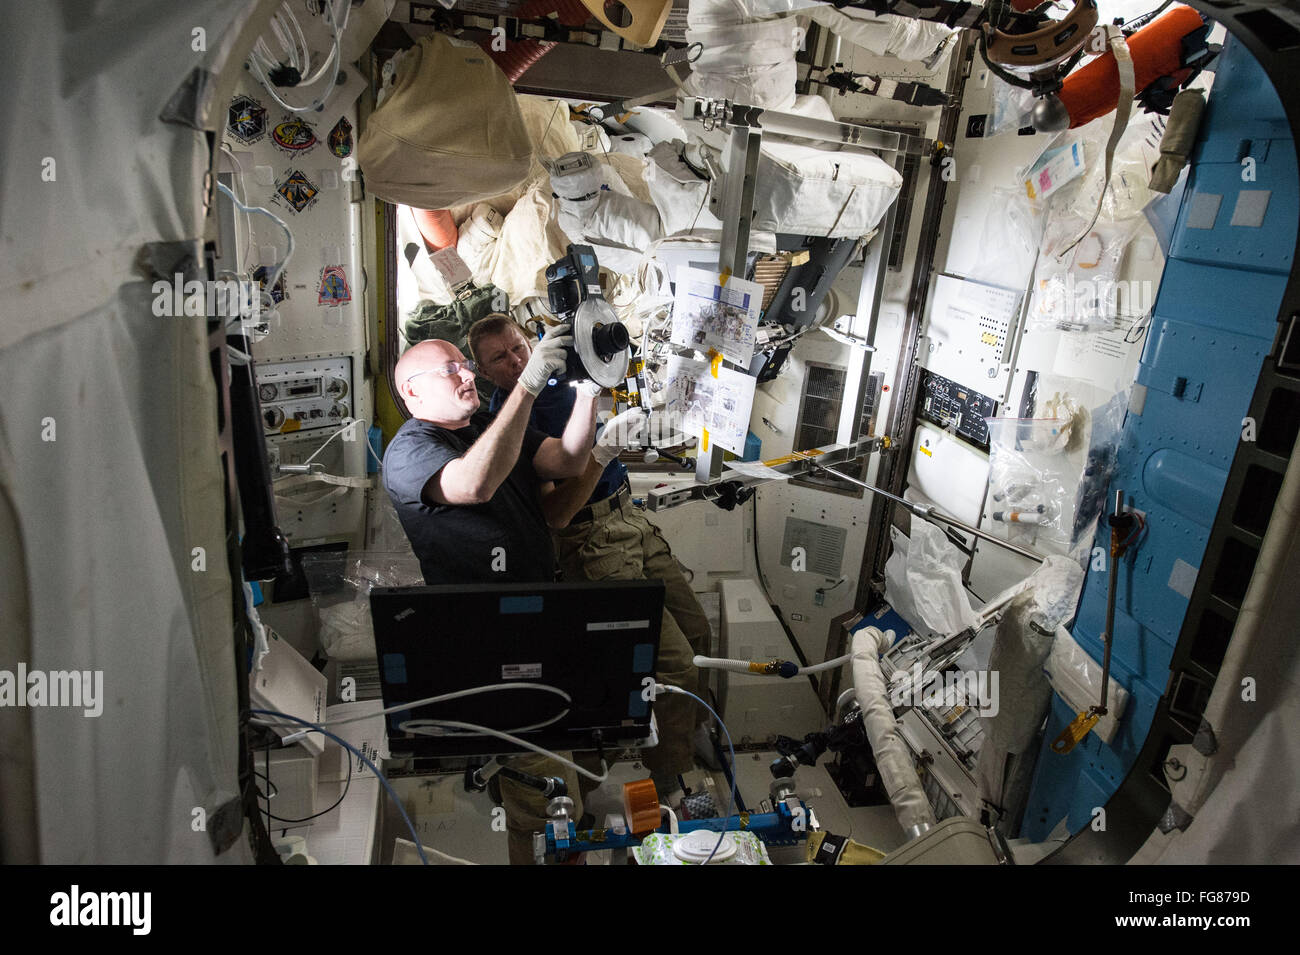 NASA astronaut Scott Kelly and ESA astronaut Timothy Peake (right) review images during a procedure to replace a fan pump separator inside one of the  spacesuits in the Quest Airlock aboard the International Space Station February 10, 2016 in Earth Orbit. Stock Photo